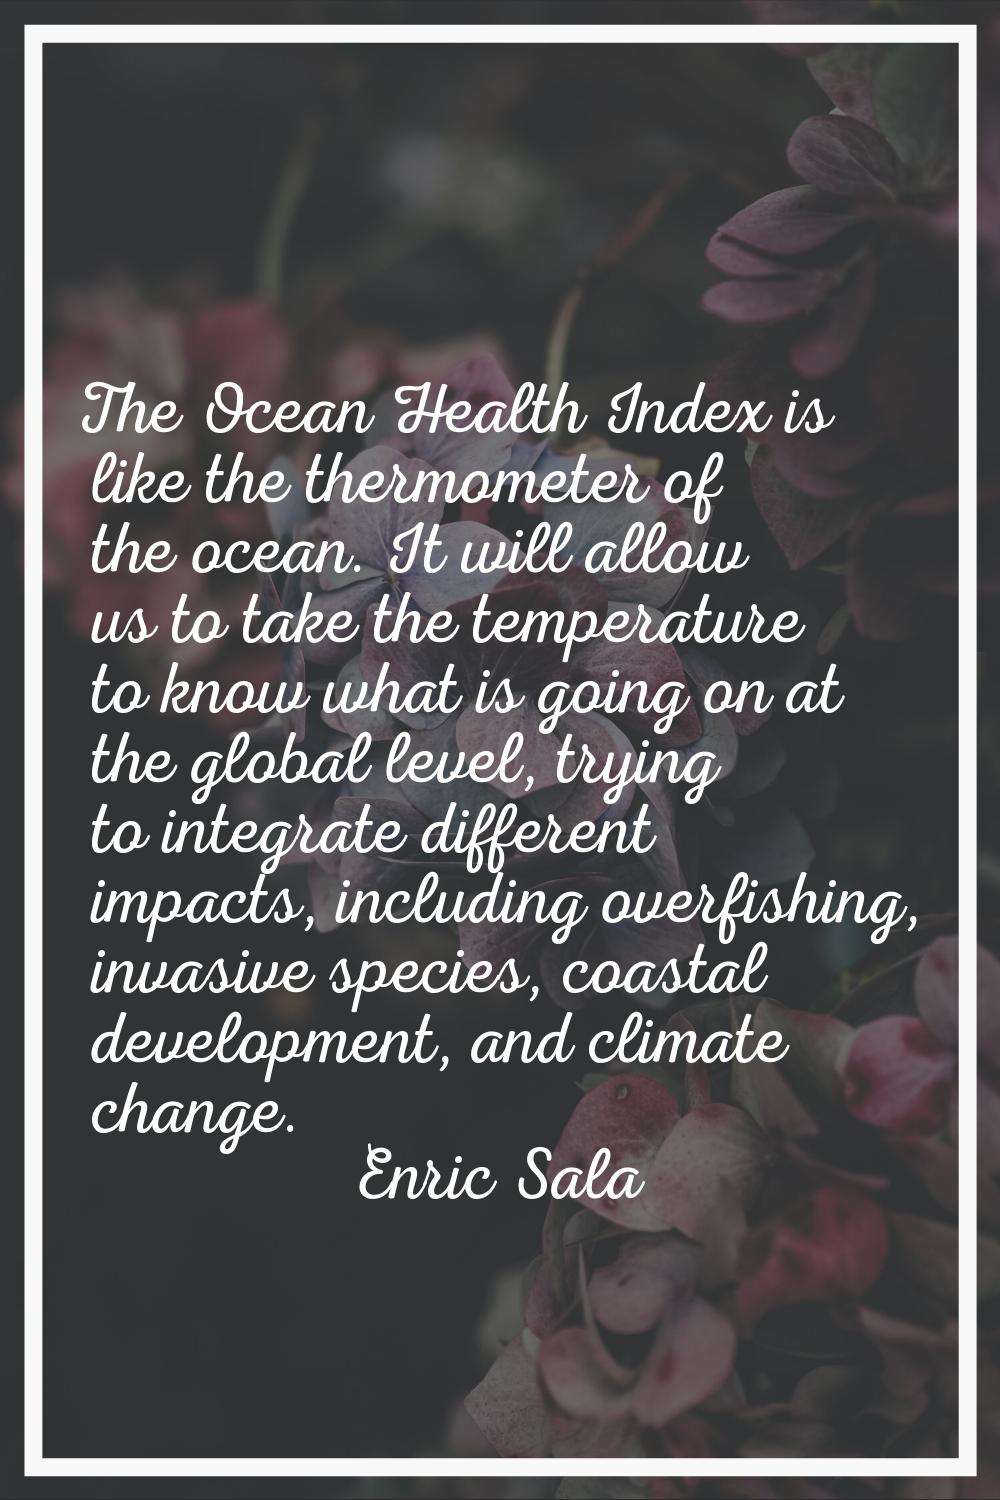 The Ocean Health Index is like the thermometer of the ocean. It will allow us to take the temperatu